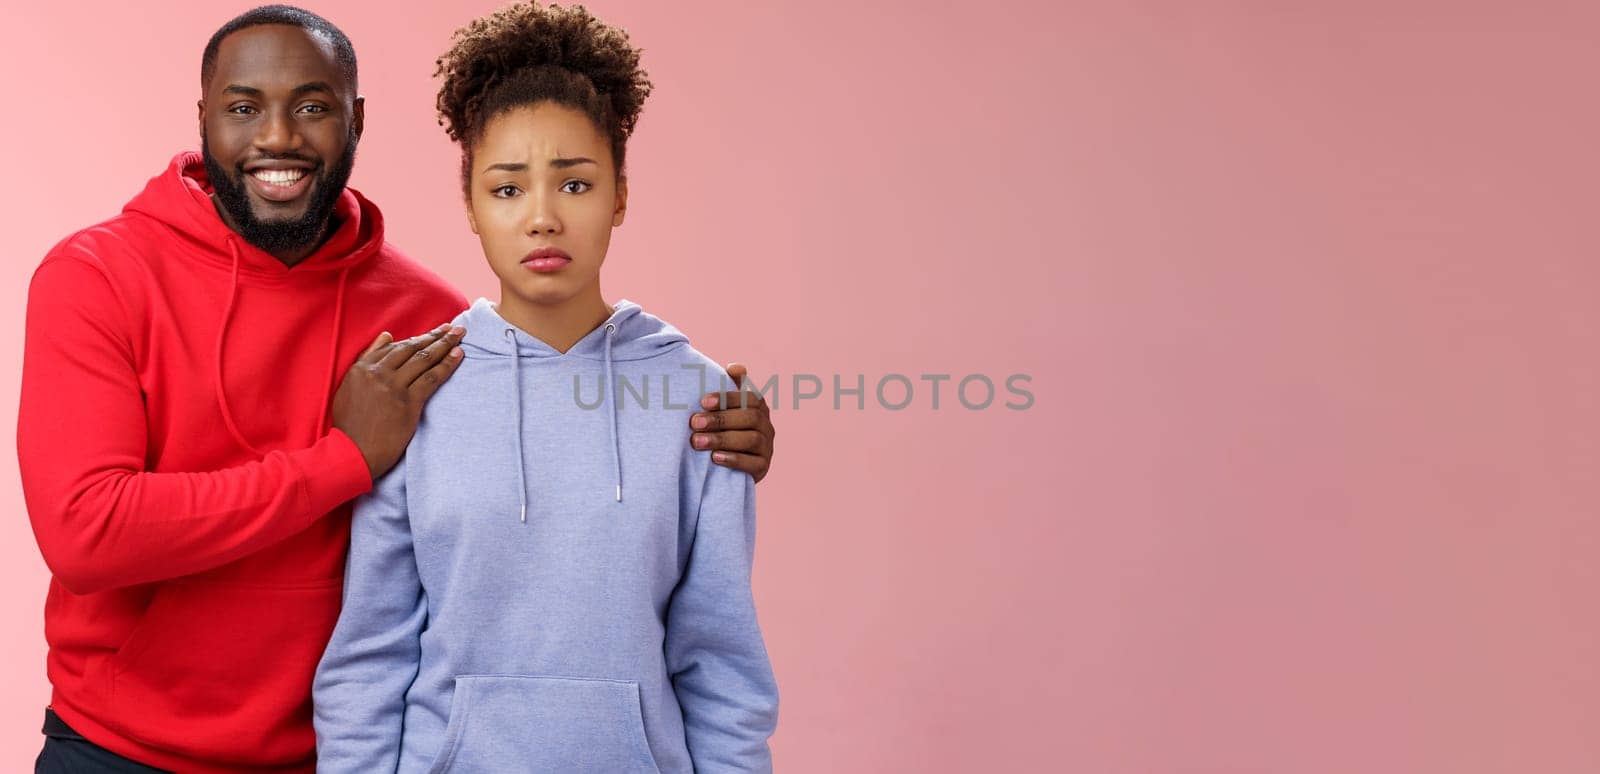 Girl unwilling participate event feel nervous insecure boyfriend encouraging hugging boost confidense assuring everything alright smiling self-assured promise everything be okay, pink background.